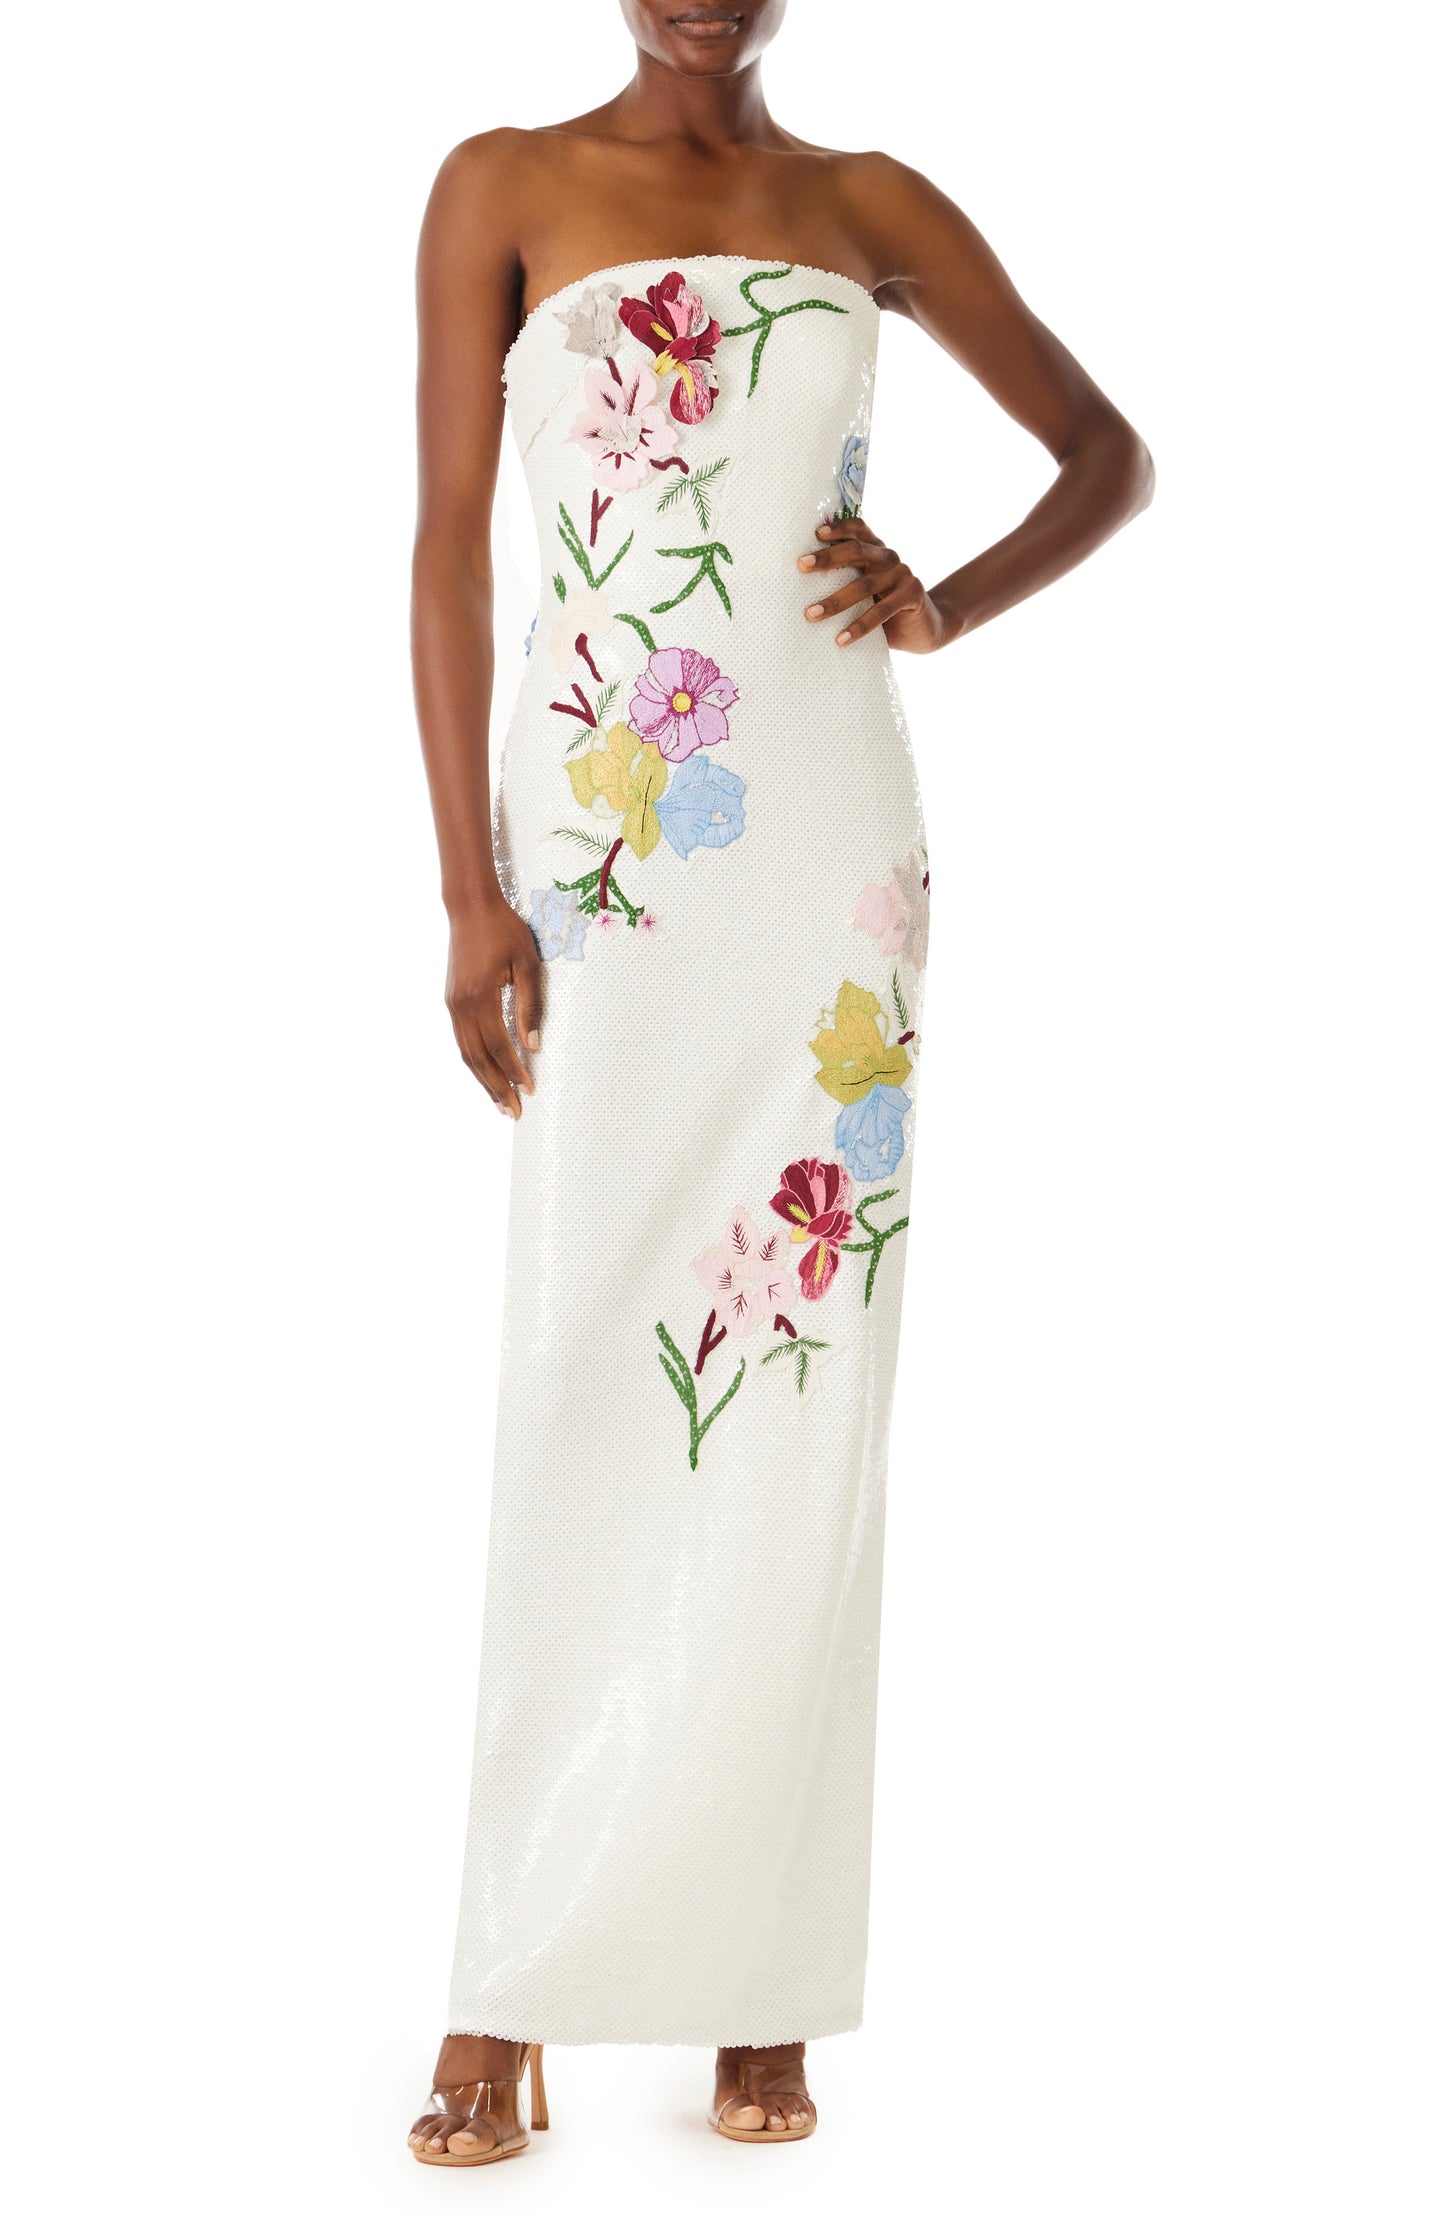 Black model in white sequin floor length gown with multi colored floral embroidery.